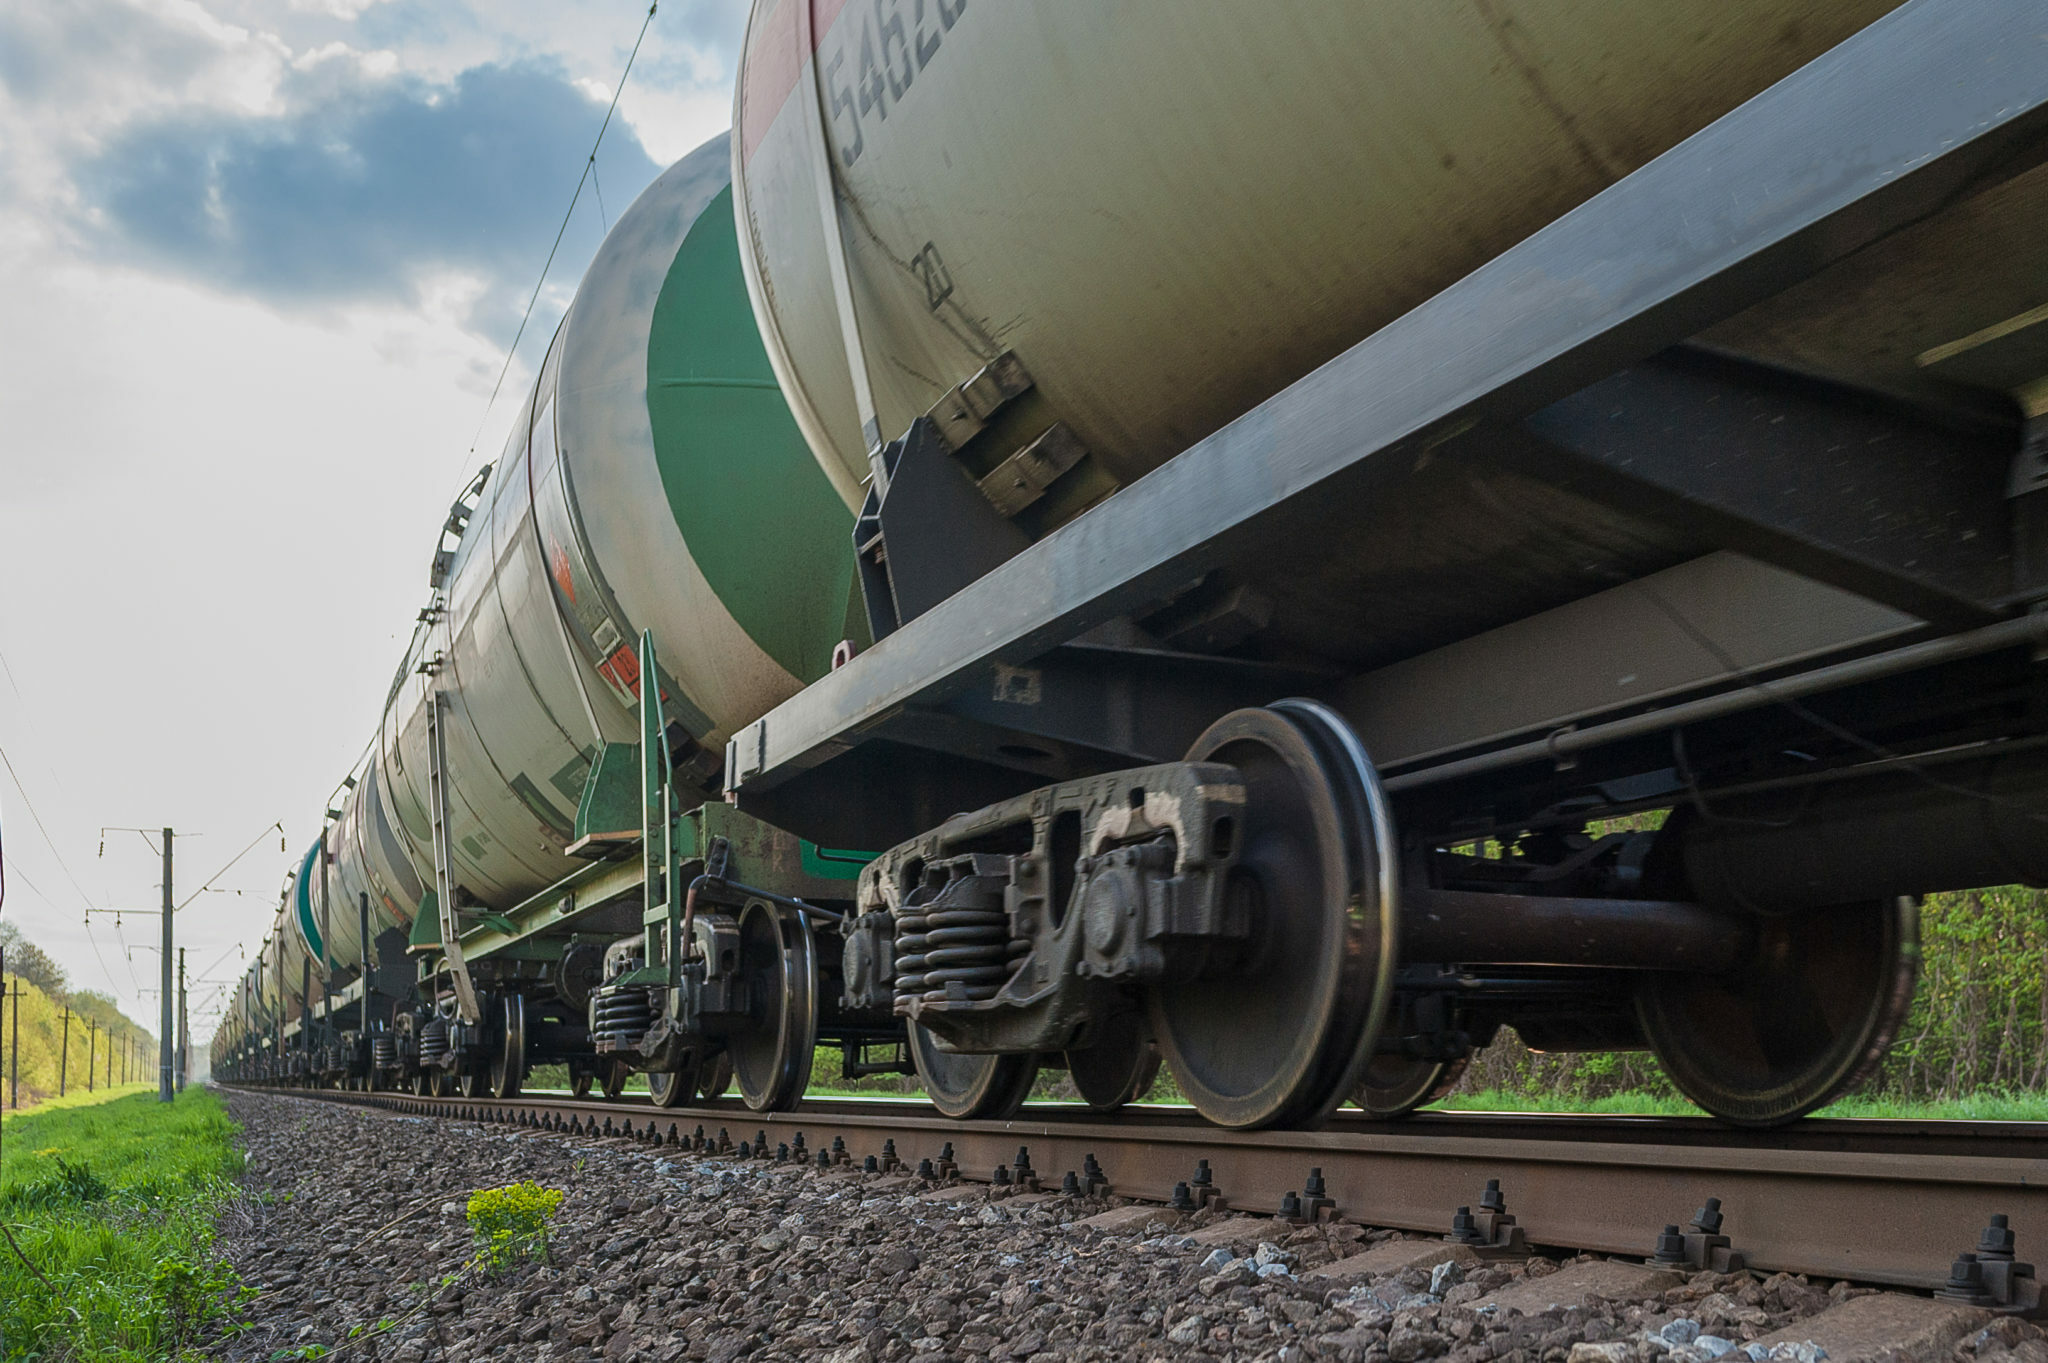 Shocking The Supply Chain: How The Threat Of Rail Strikes Exposes The Weakness Of Logistics